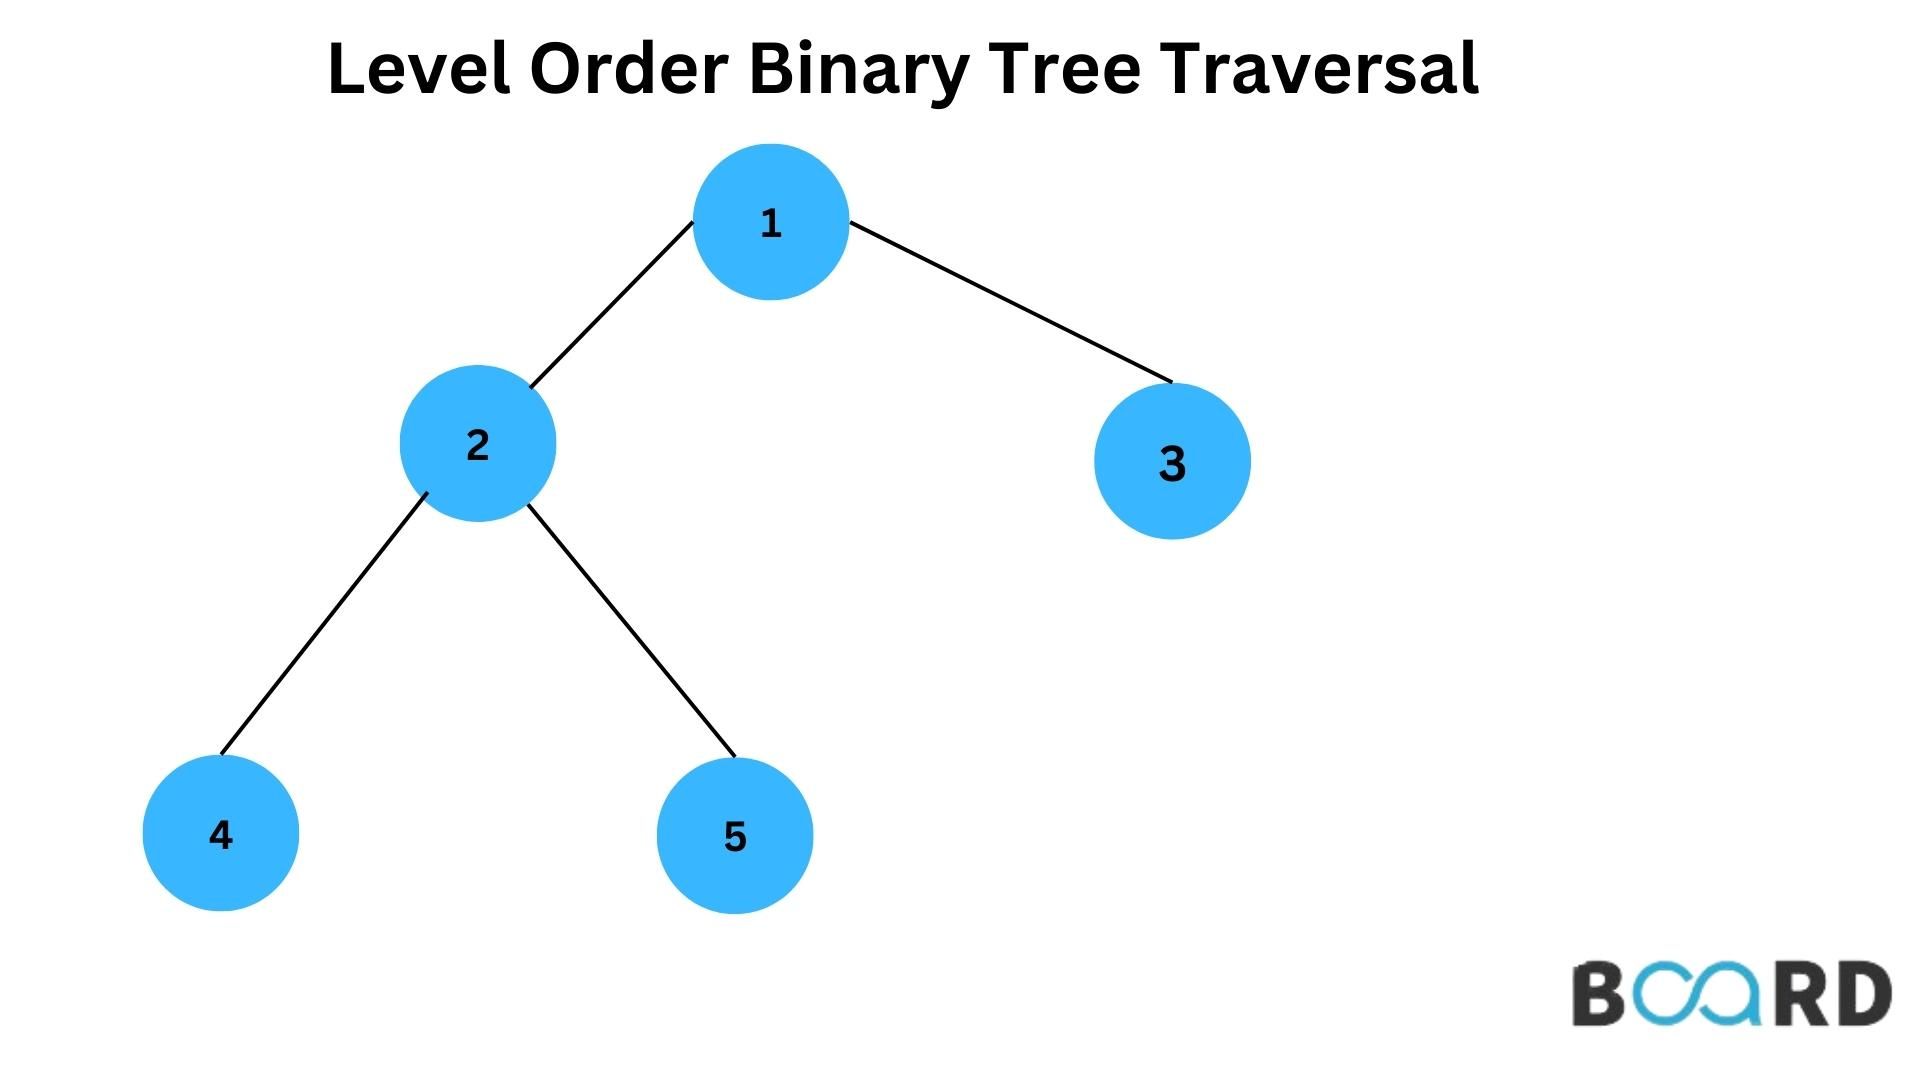 How to Perform Level Order Traversal?